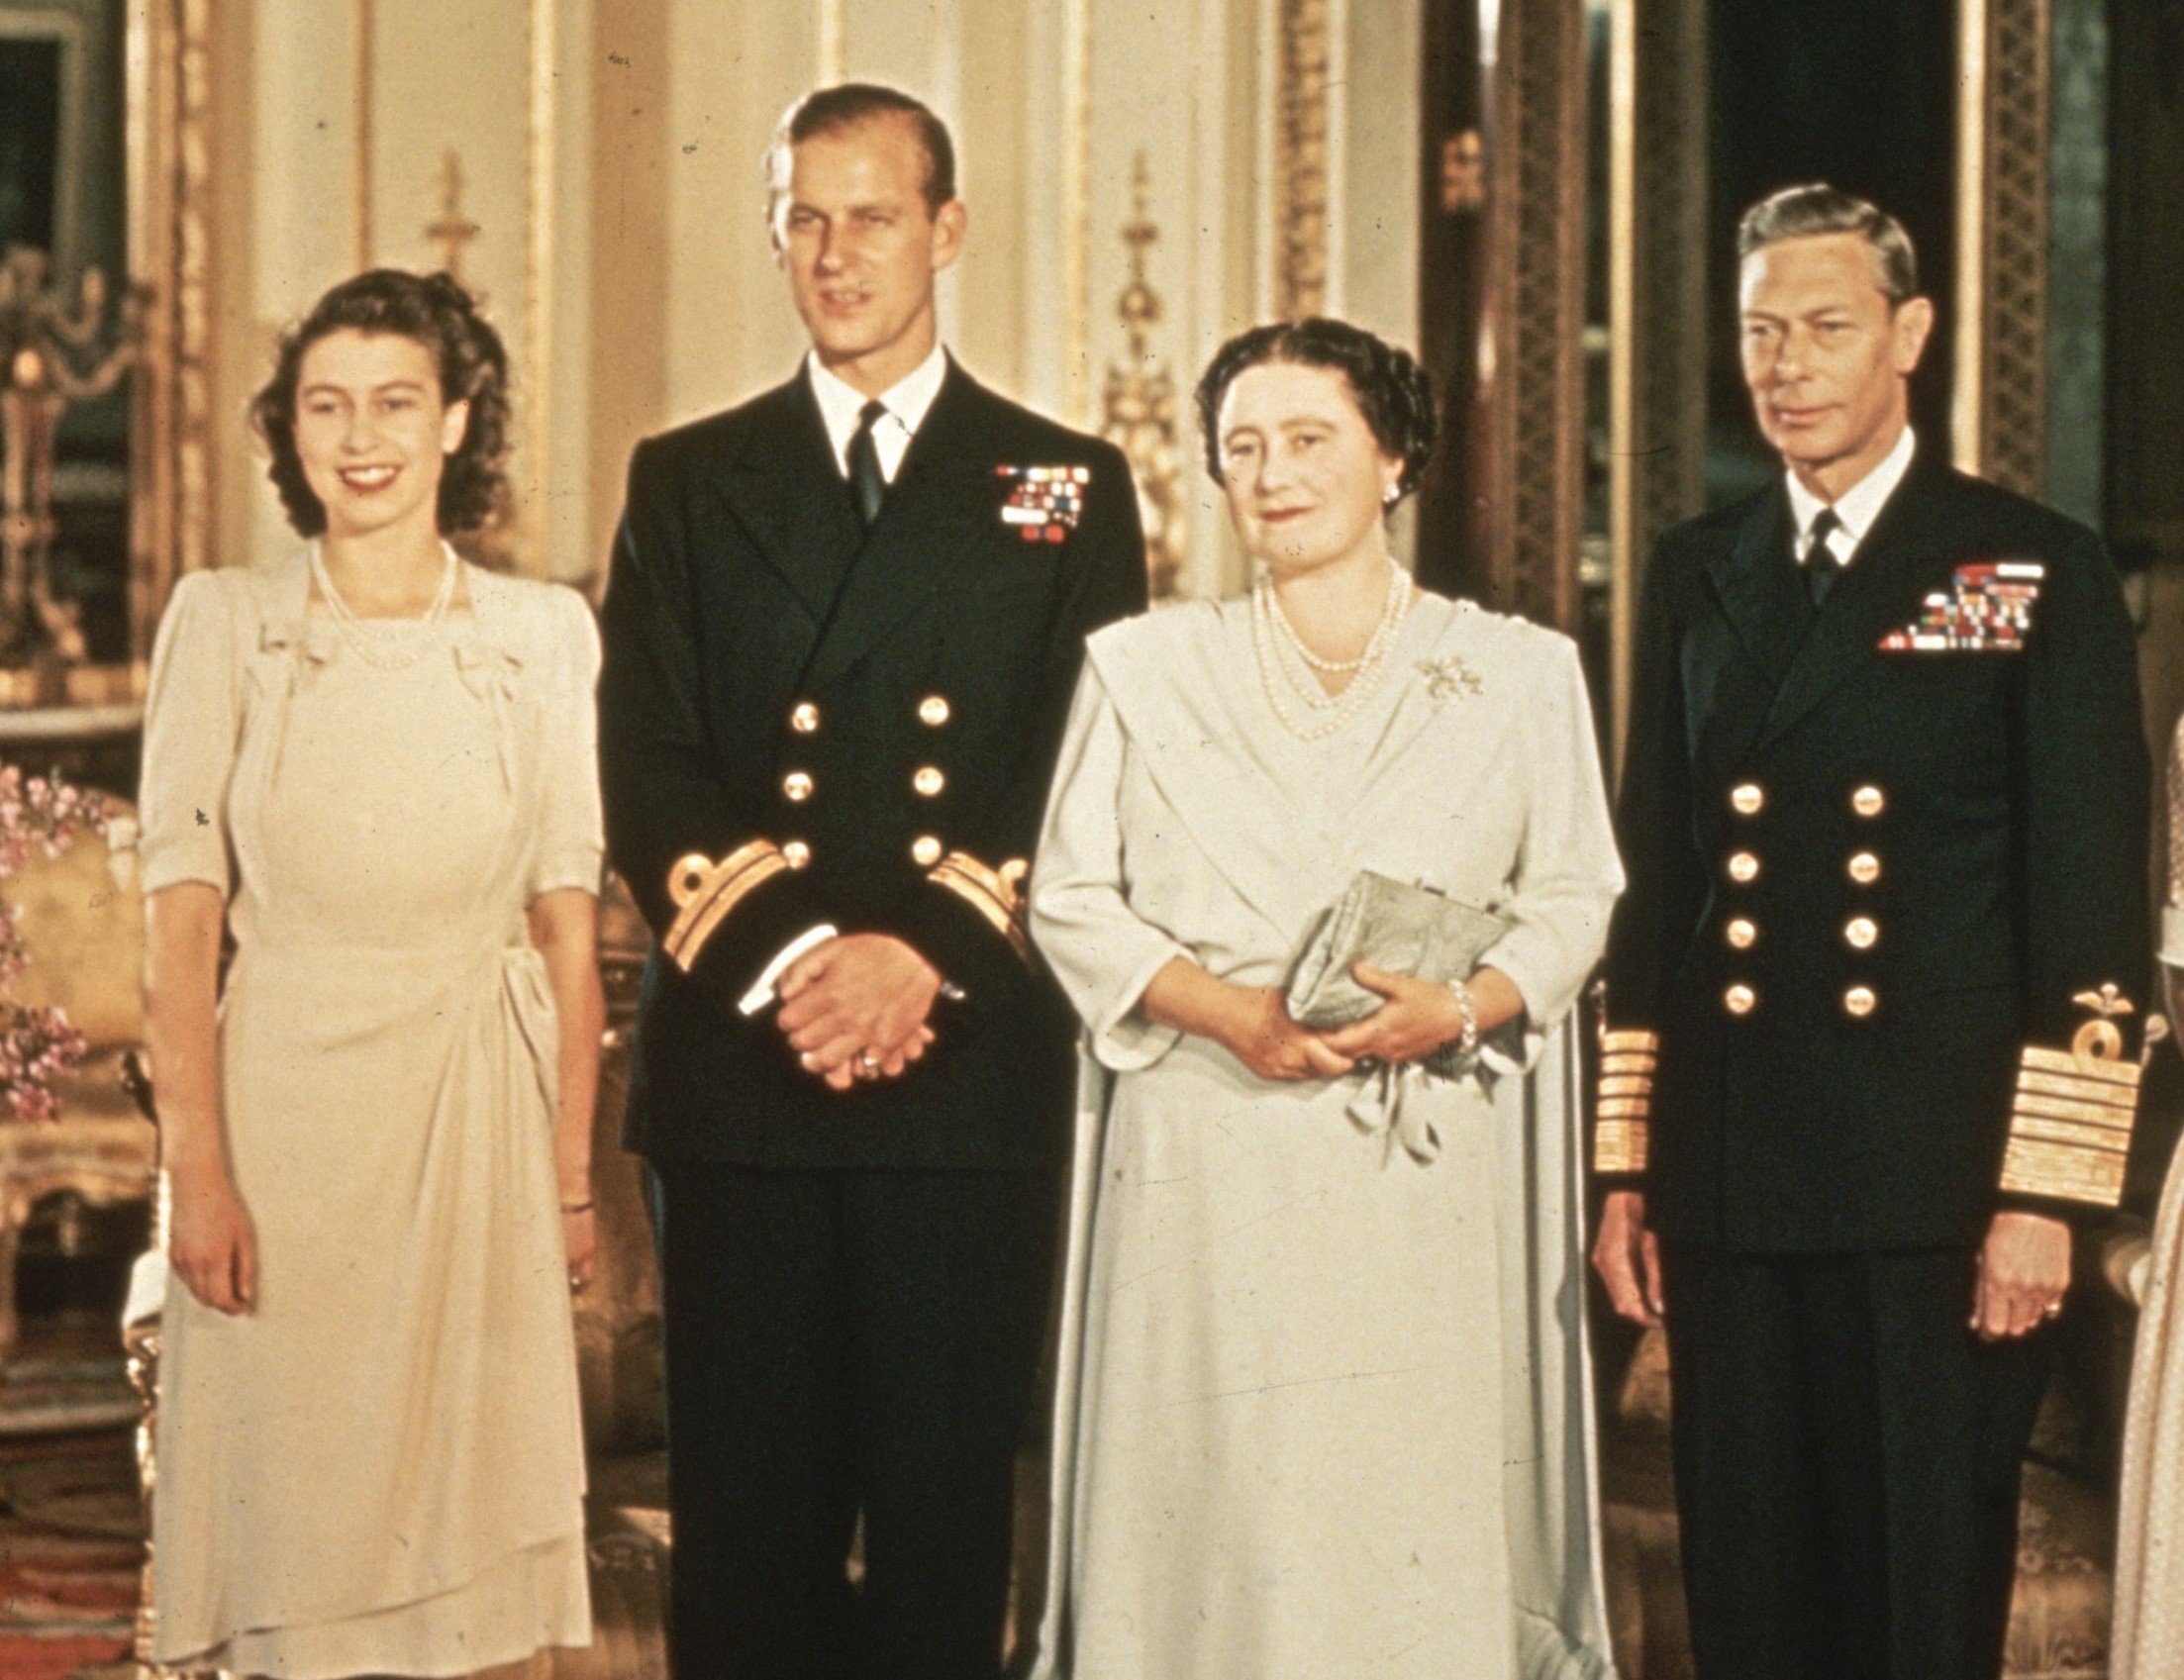 Princess Elizabeth, Prince Philip, the Queen Mother, and King George VI